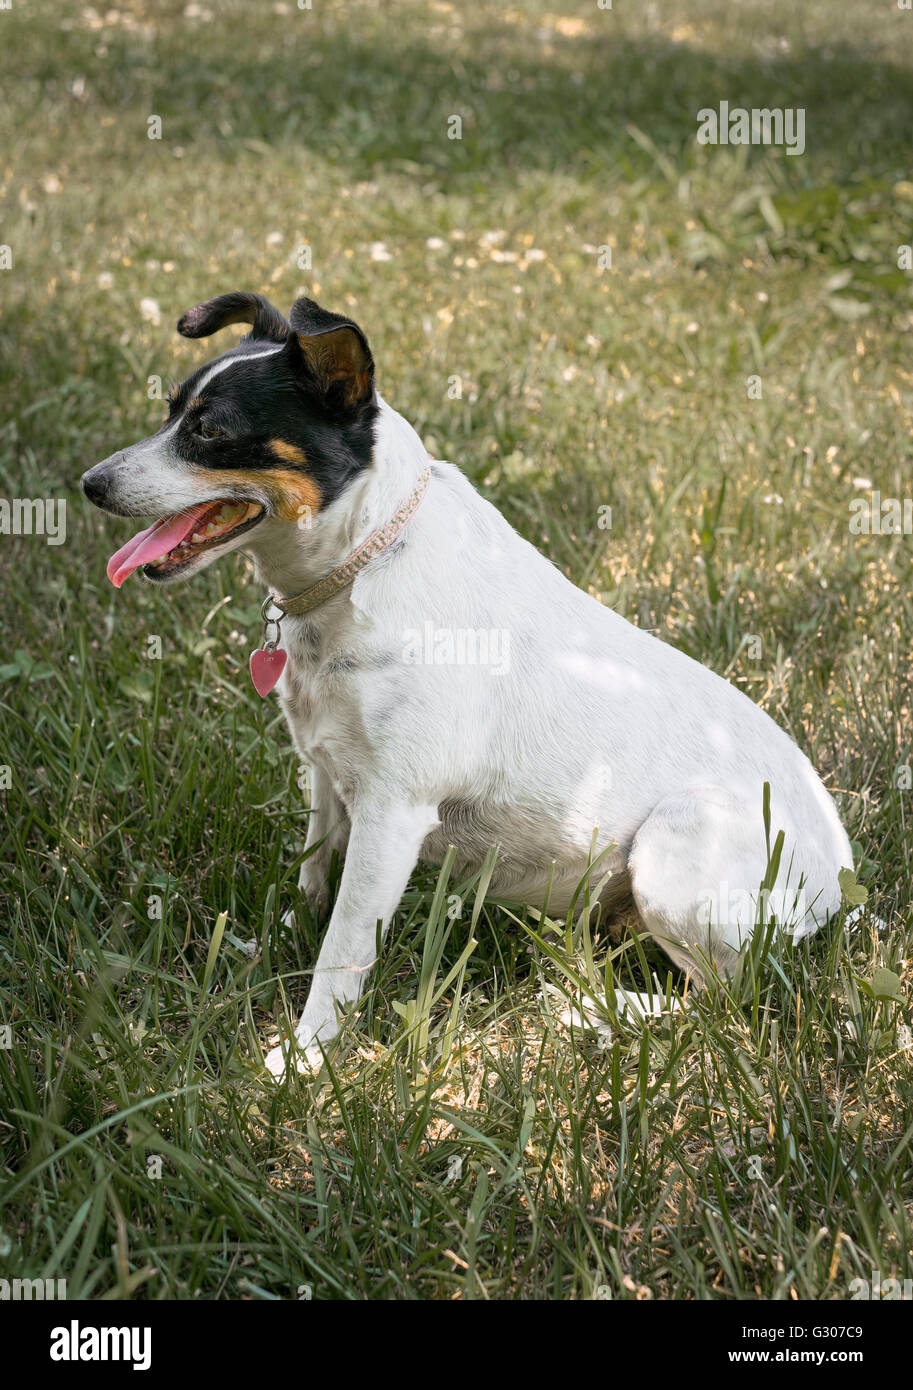 Rat Terrier dog in grass with tongue hanging out in hot summer weather. Stock Photo